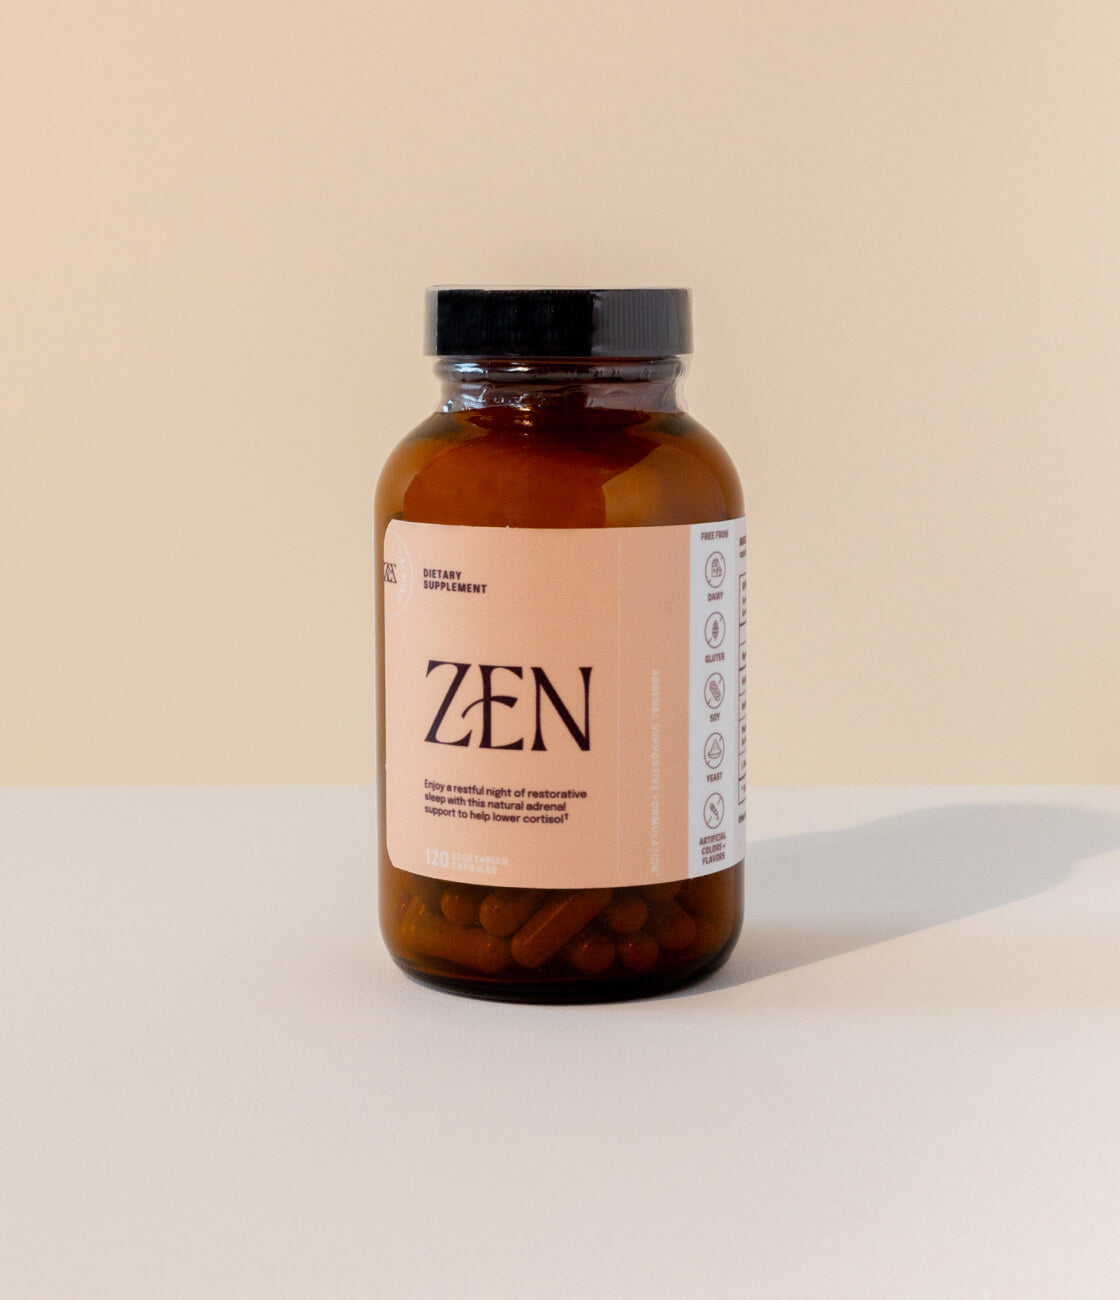 Enjoy a restful night of restorative sleep with this natural adrenal support to help lower cortisol.[AD: A 120 capsule bottle of Zen with a yellow label sits on a plain yellow and cream backdrop]